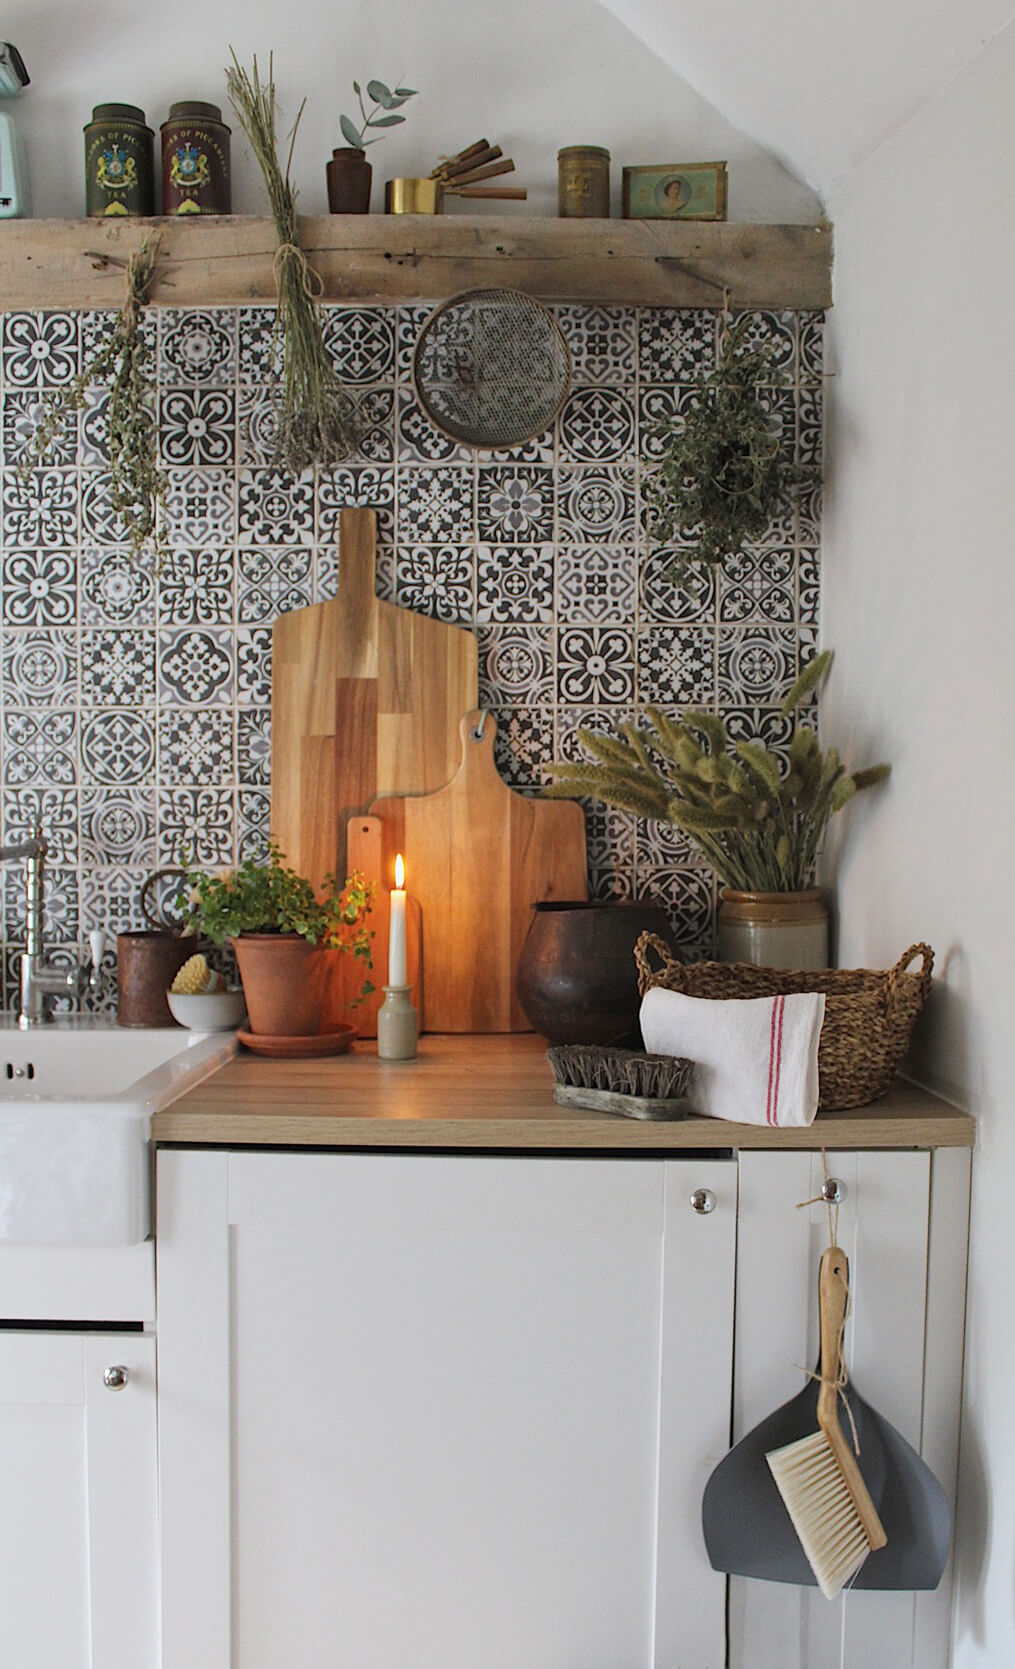 Home tour with Rachel Ashfield of @the_old_cottage - a corner of the ktichen with patterned wall tiles, reclaimed wooden shelving and vintage decorative items